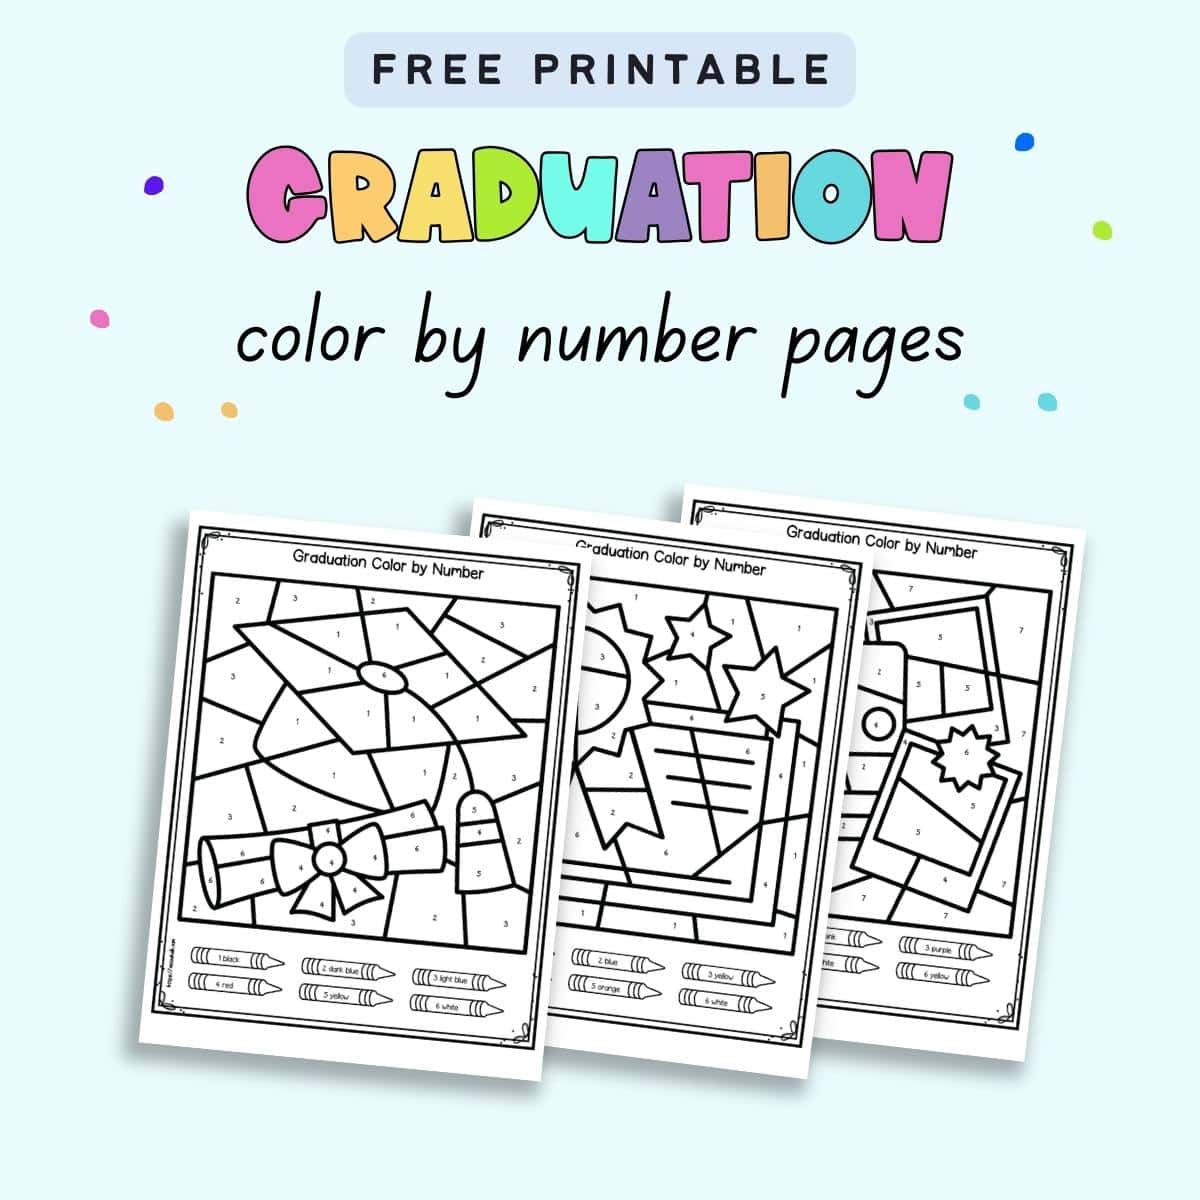 Text "free printable graduation color by number pages" with a preview of three graduation color by number pass with numbers 1-6